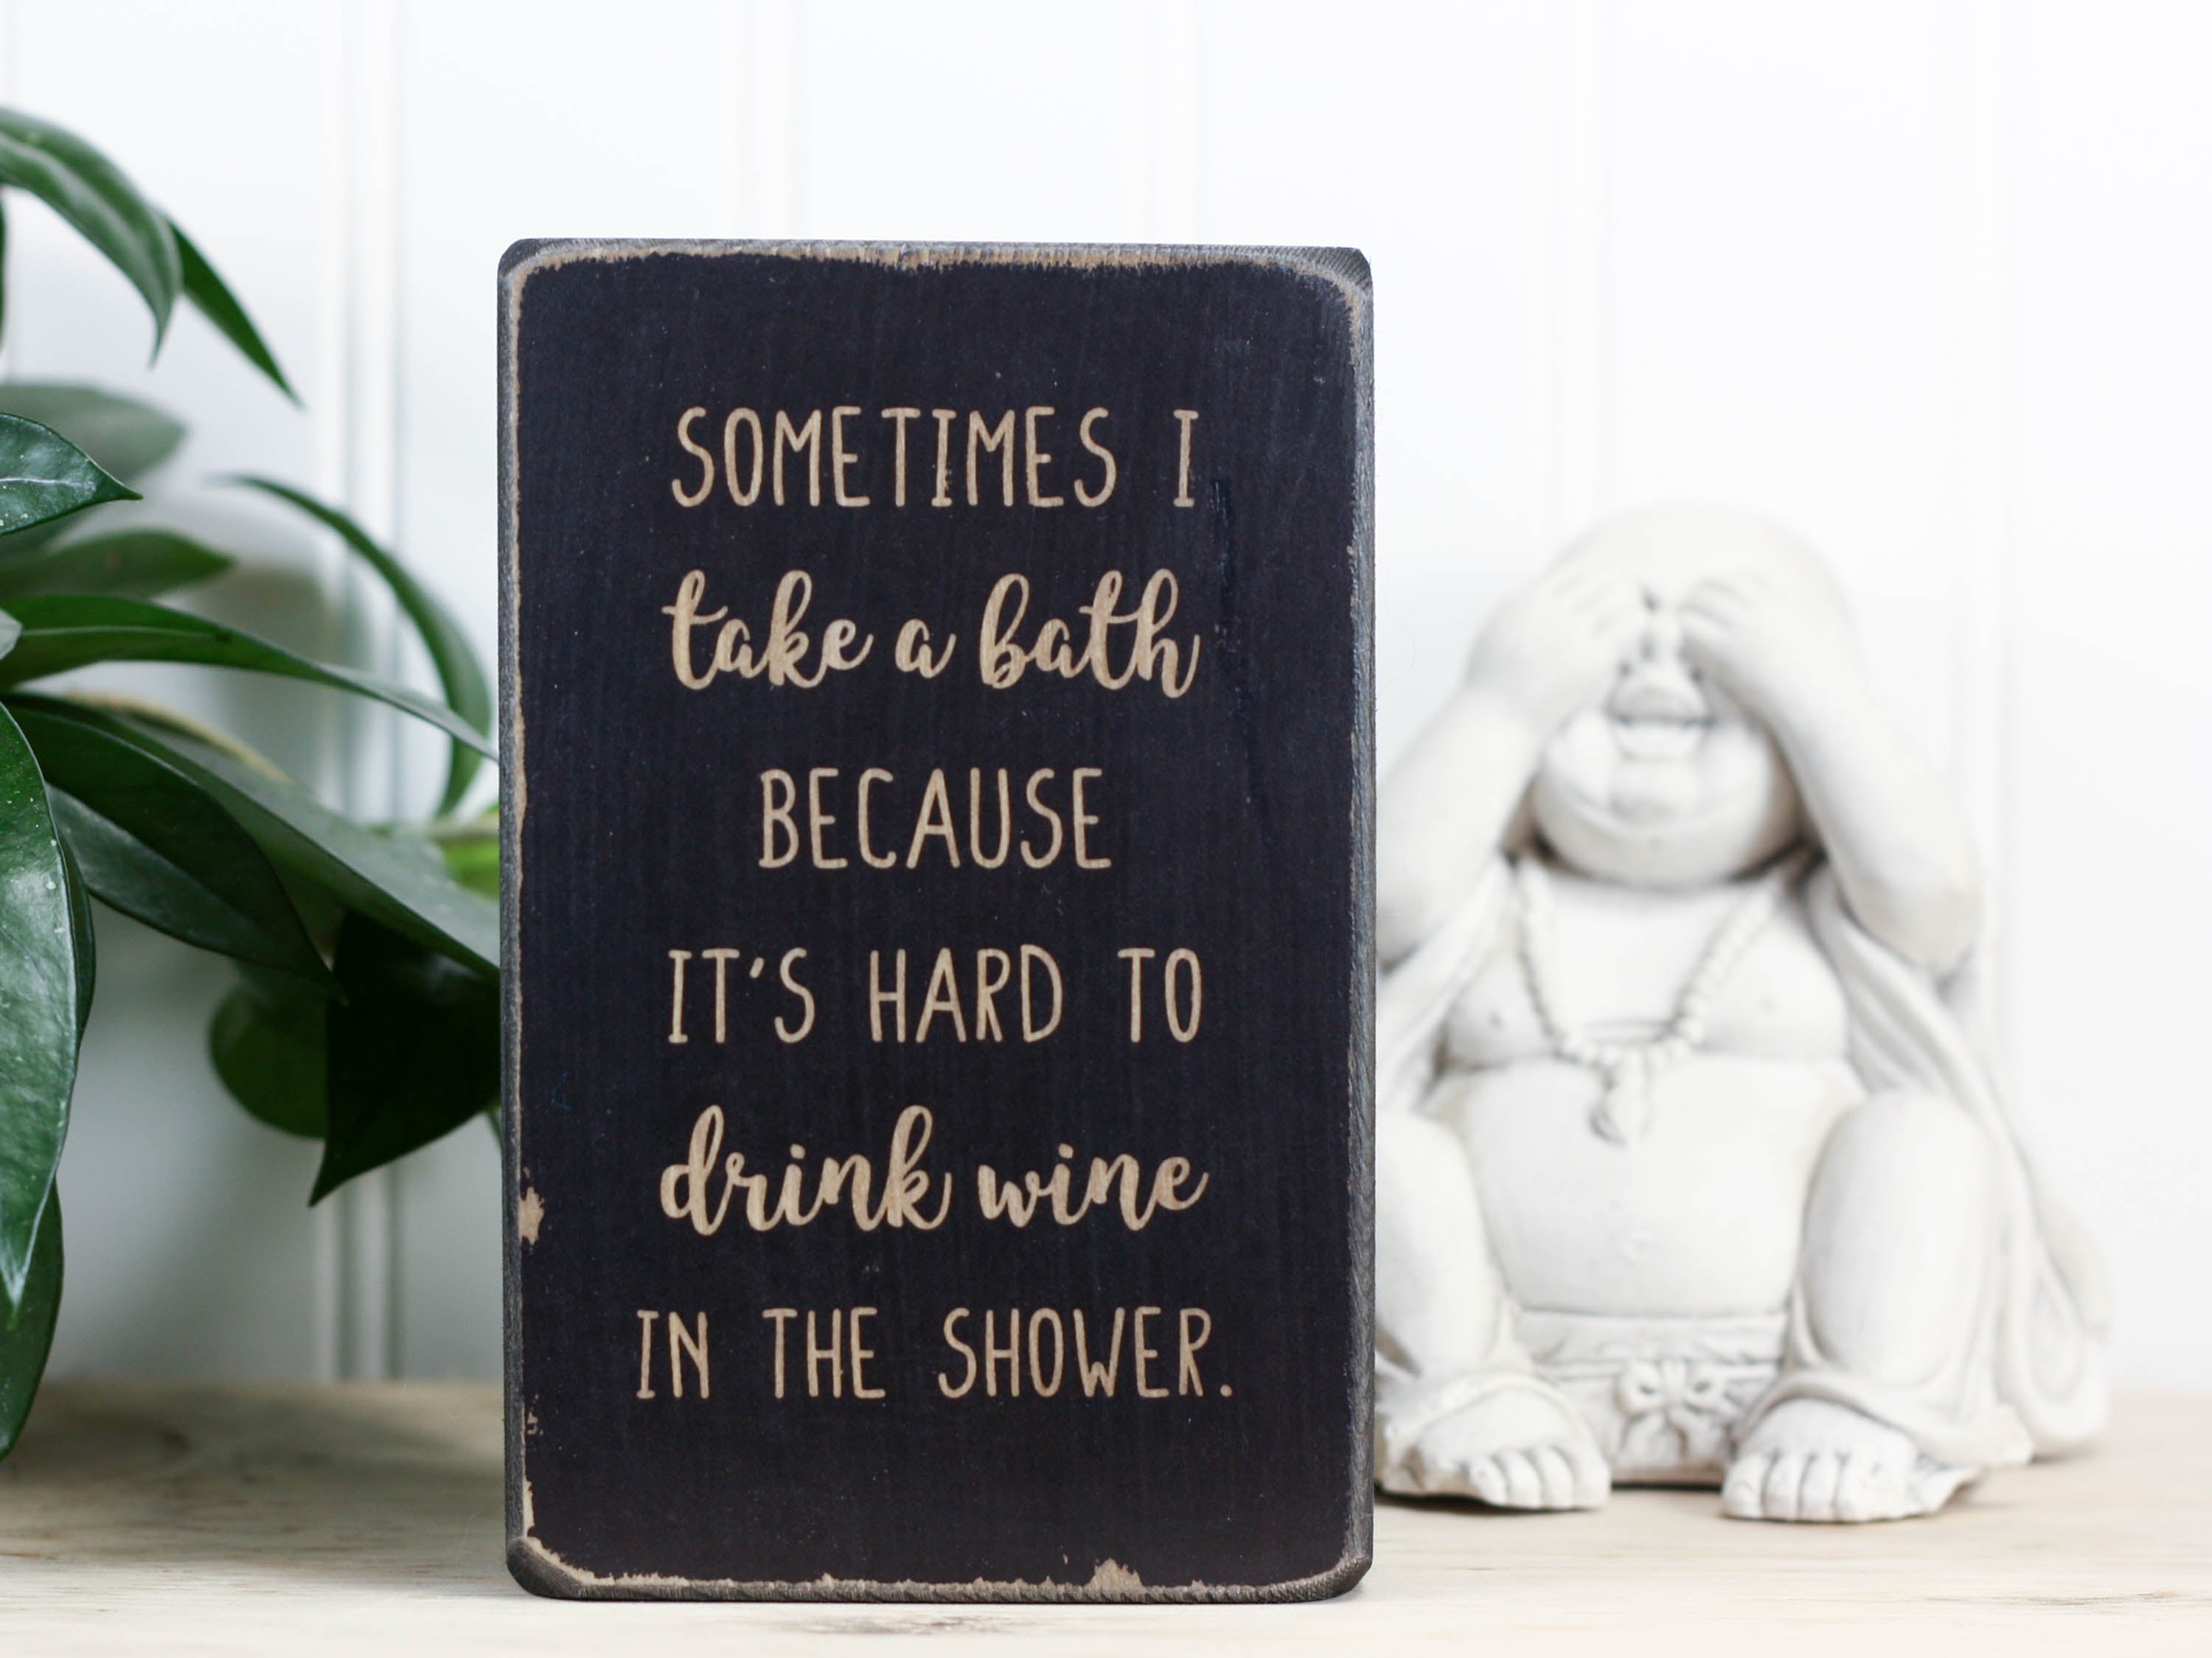 Small wood sign in distressed black with the saying "Sometimes I take a bath because it's hard to drink wine in the shower."